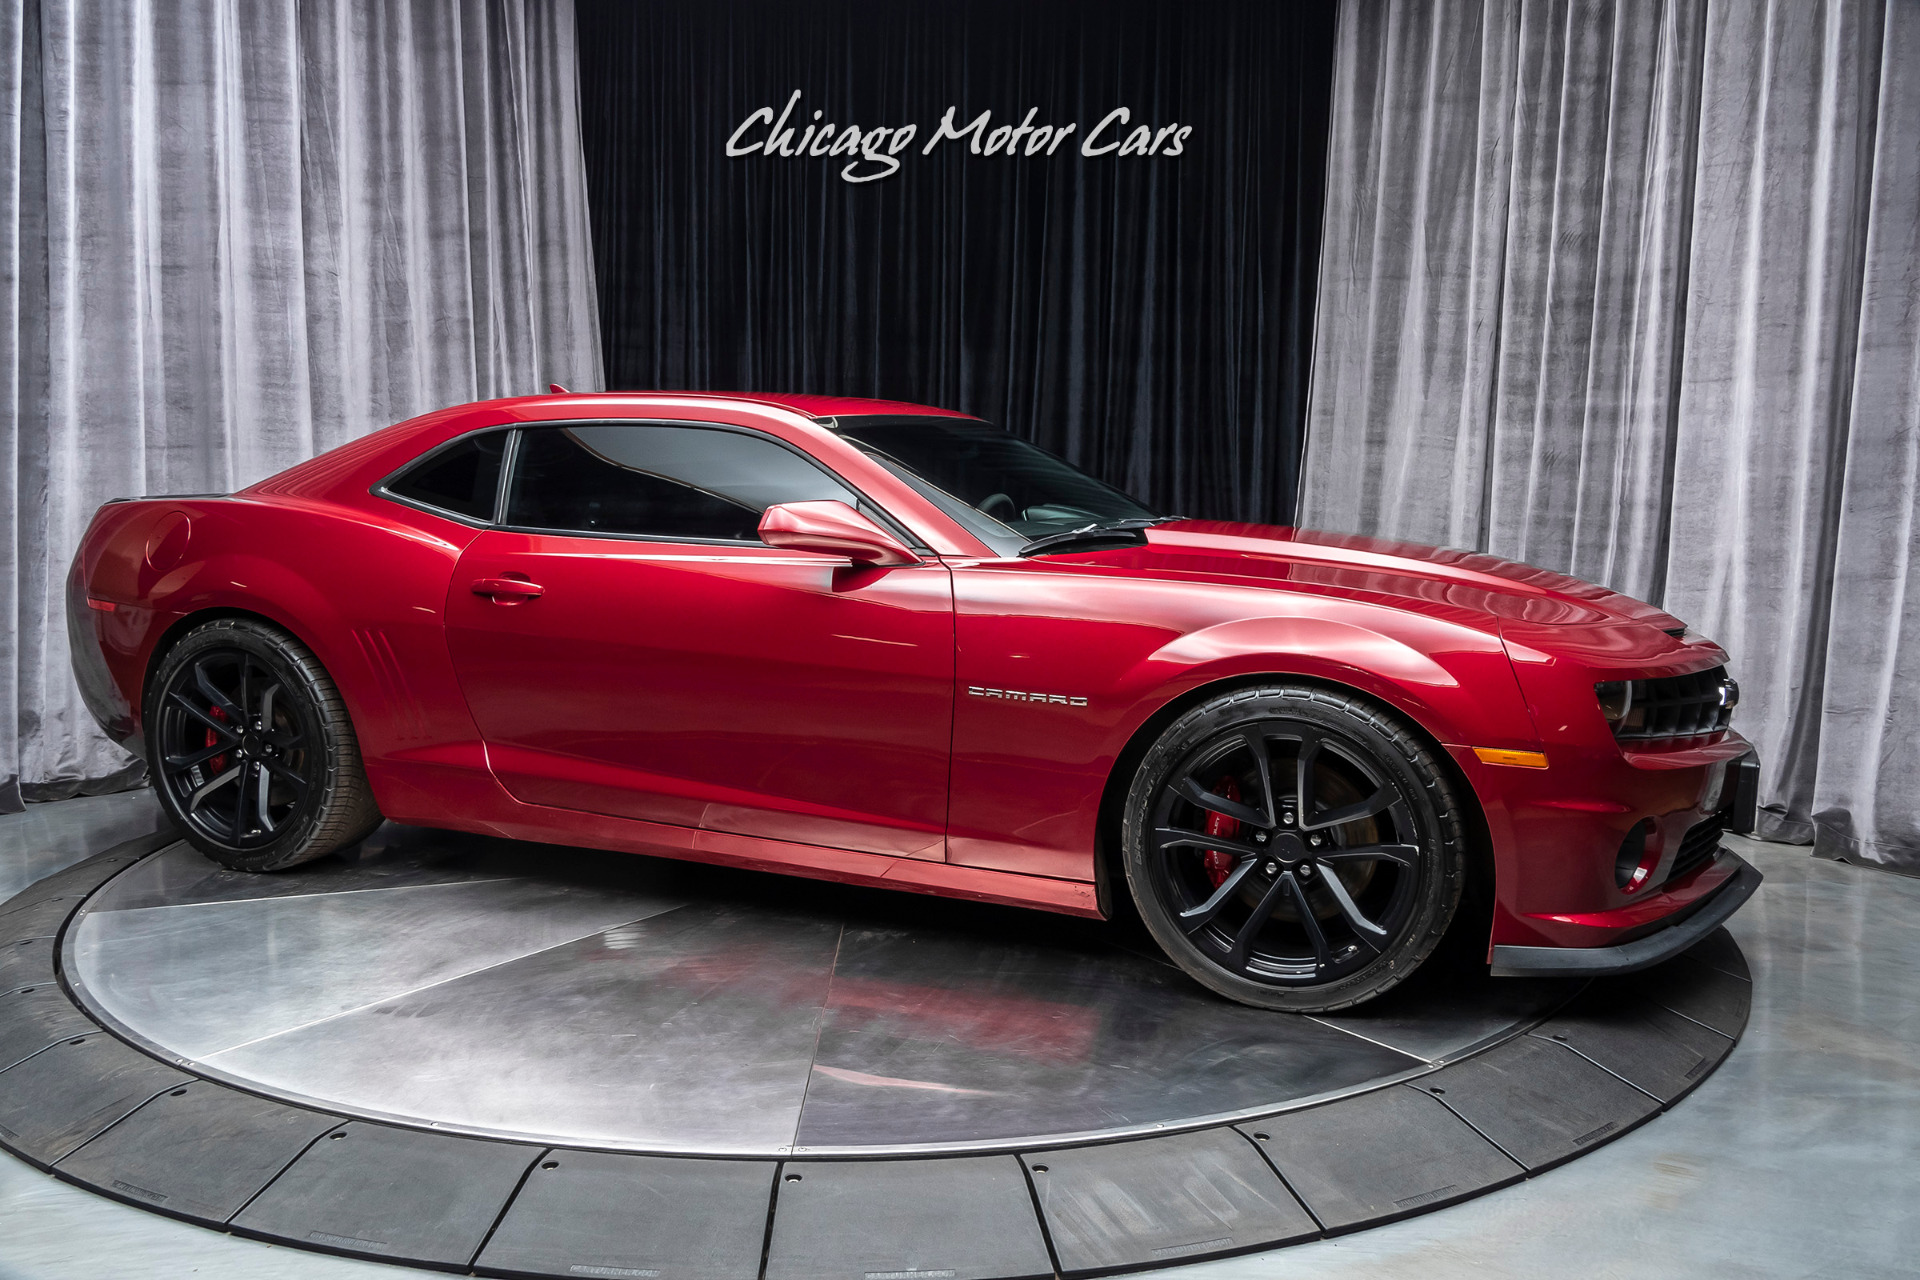 Used 2013 Chevrolet Camaro 2SS 1LE For Sale ($25,800 ...